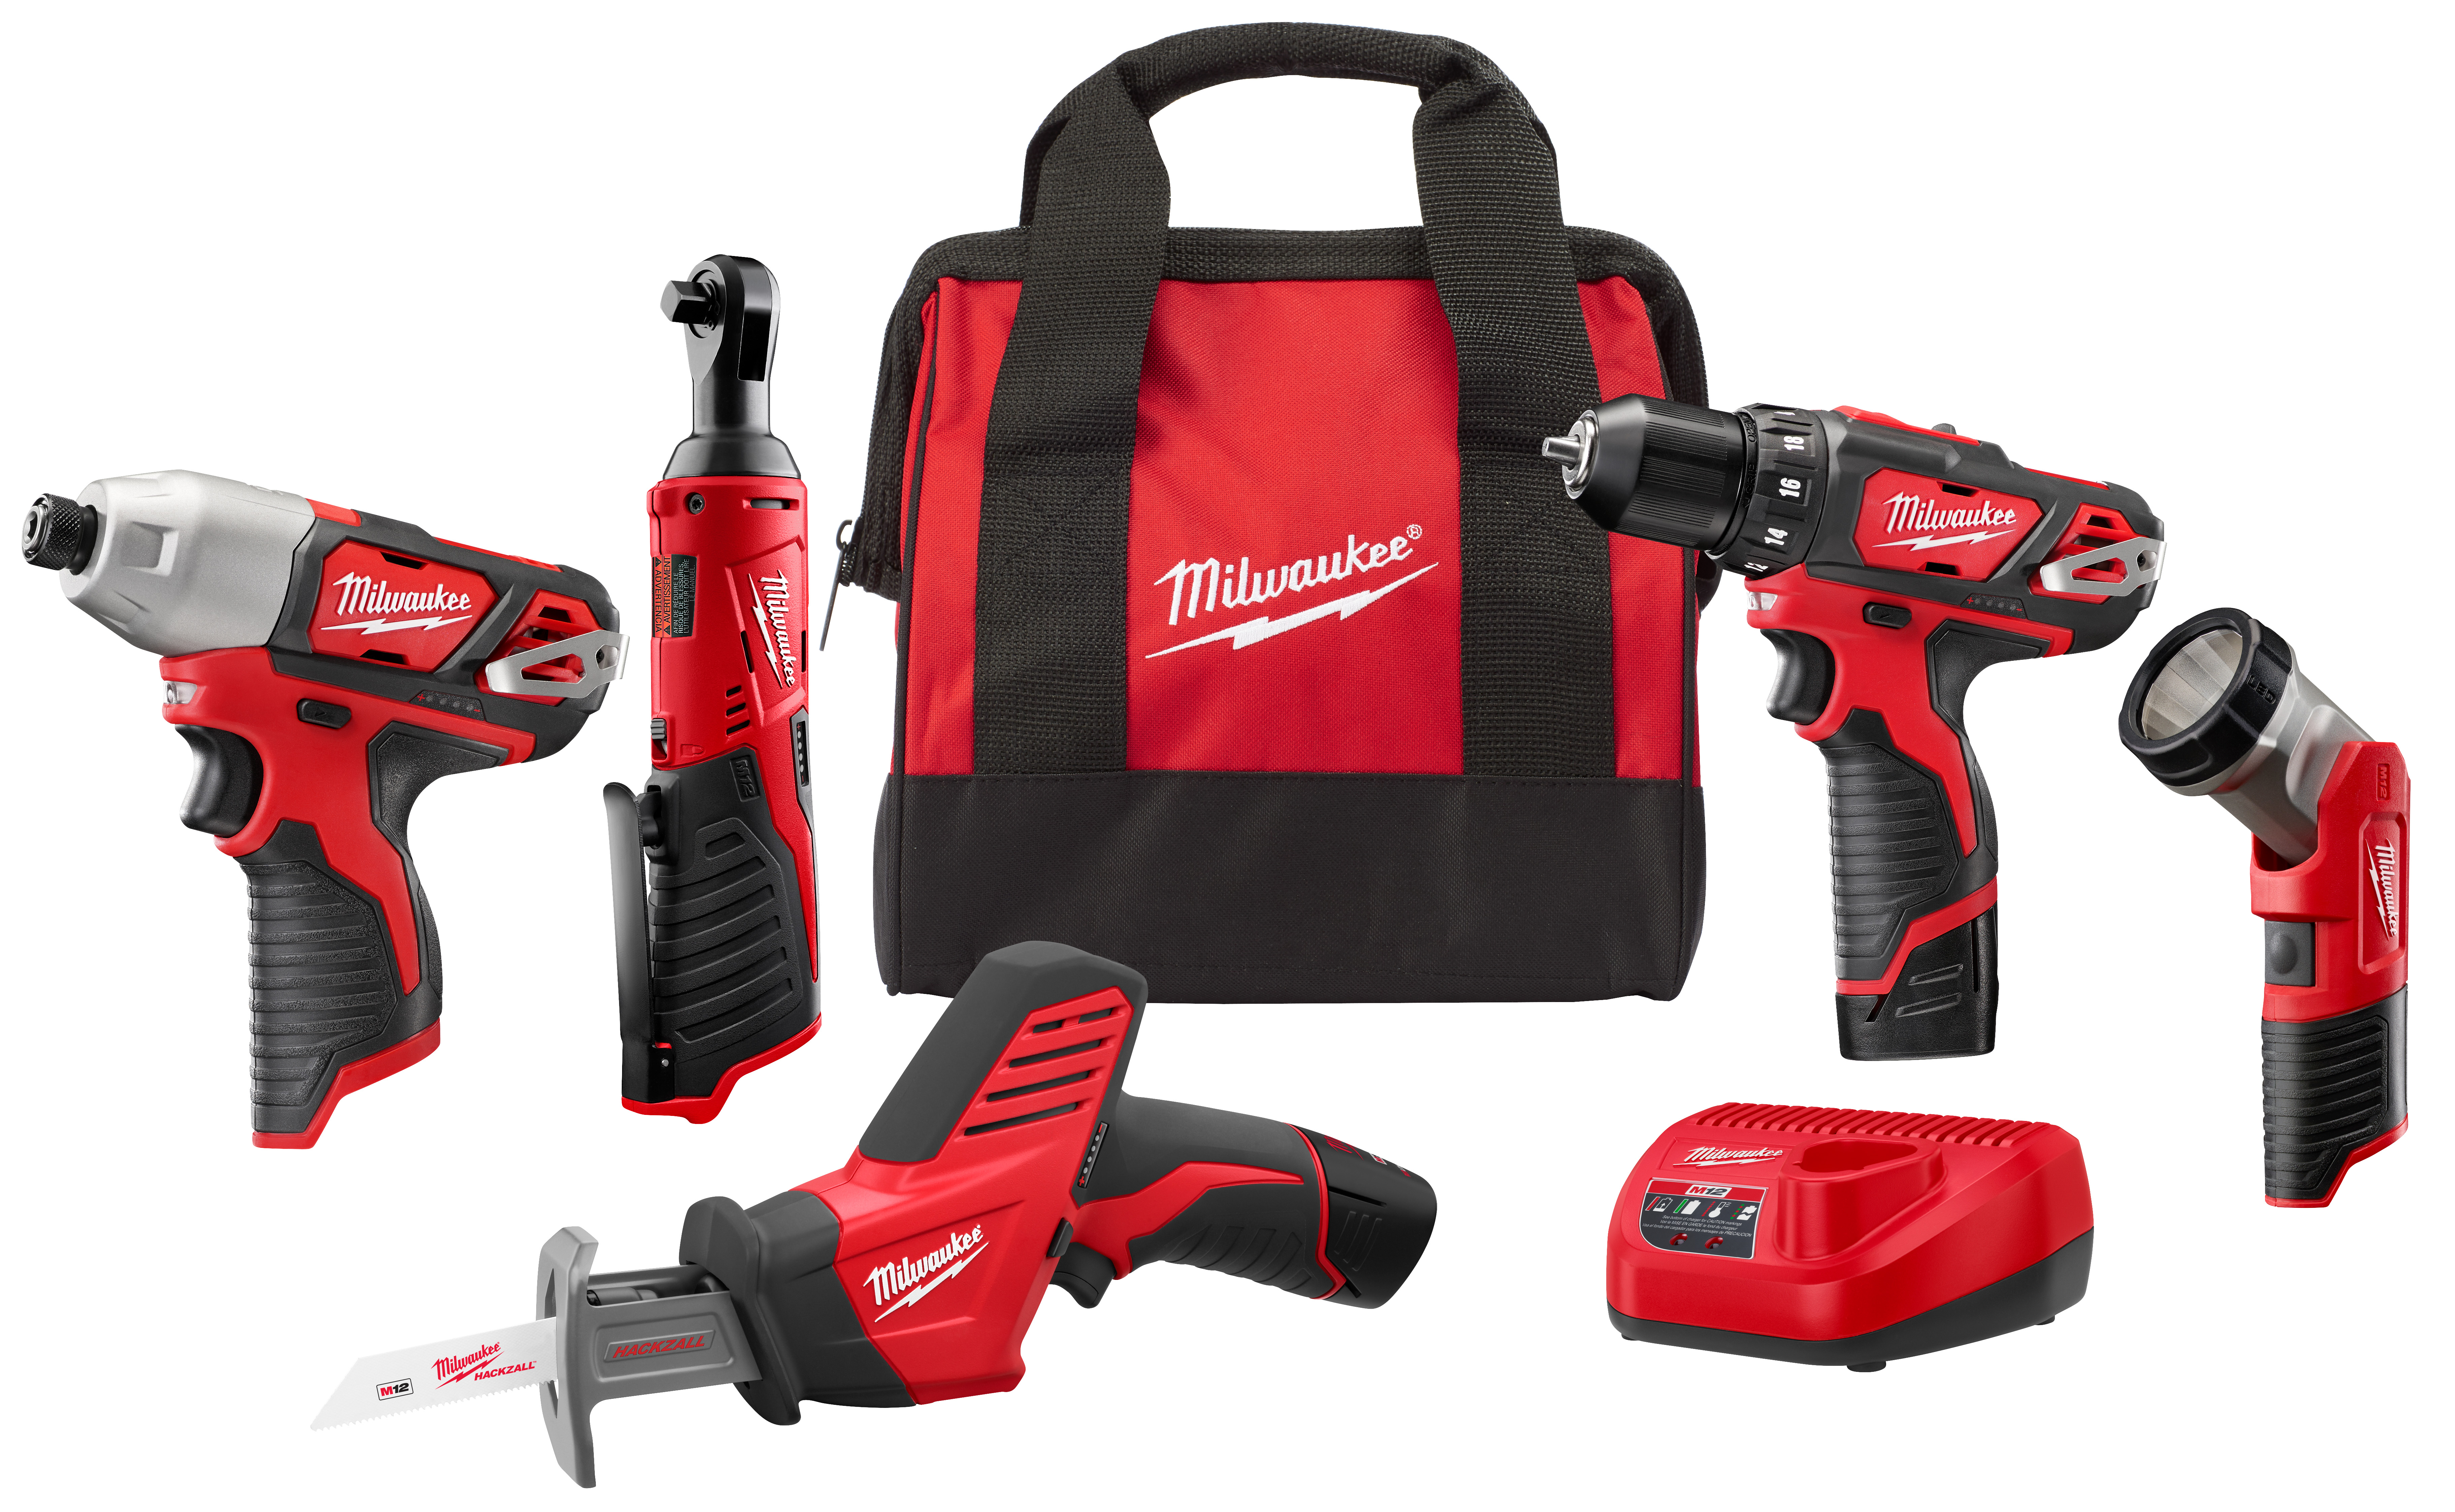 m12 5PC combo kit 2498-25
INCLUDES
(1)M12 3/8 
Drill/Driver(2407-20)
(1)M12 HACKZALL Recip 
Saw(2420-20)
(1)M12  Hex Impact 
Driver(2462-20)
(2)M12 REDLITHIUM CP1.5 
Battery Pack(48-11-2401)
(1)M12 Lithium-ion Battery 
Charger (48-59-2401)
(1)M12 Work Light(49-24-0146)
(1)Contractor Bag
(2)Belt Clip